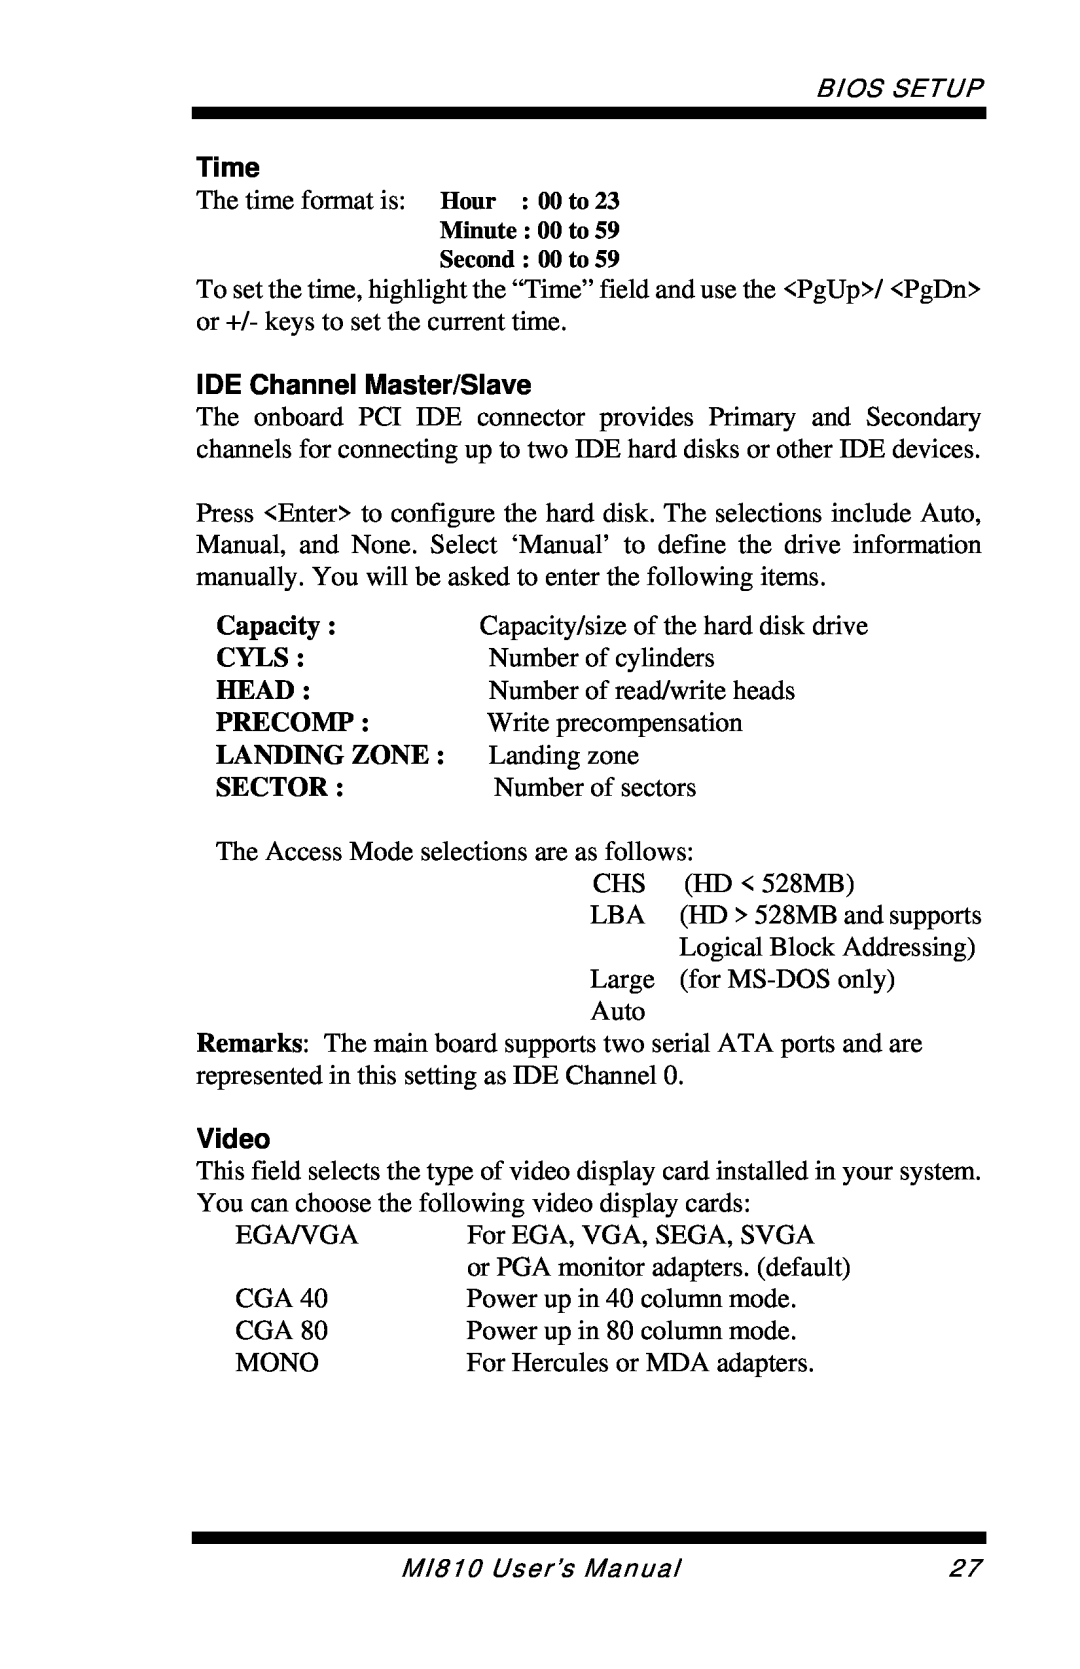 Intel MI810 user manual Time, IDE Channel Master/Slave, Capacity, Cyls, Head, Precomp, Landing Zone, Sector, Video 